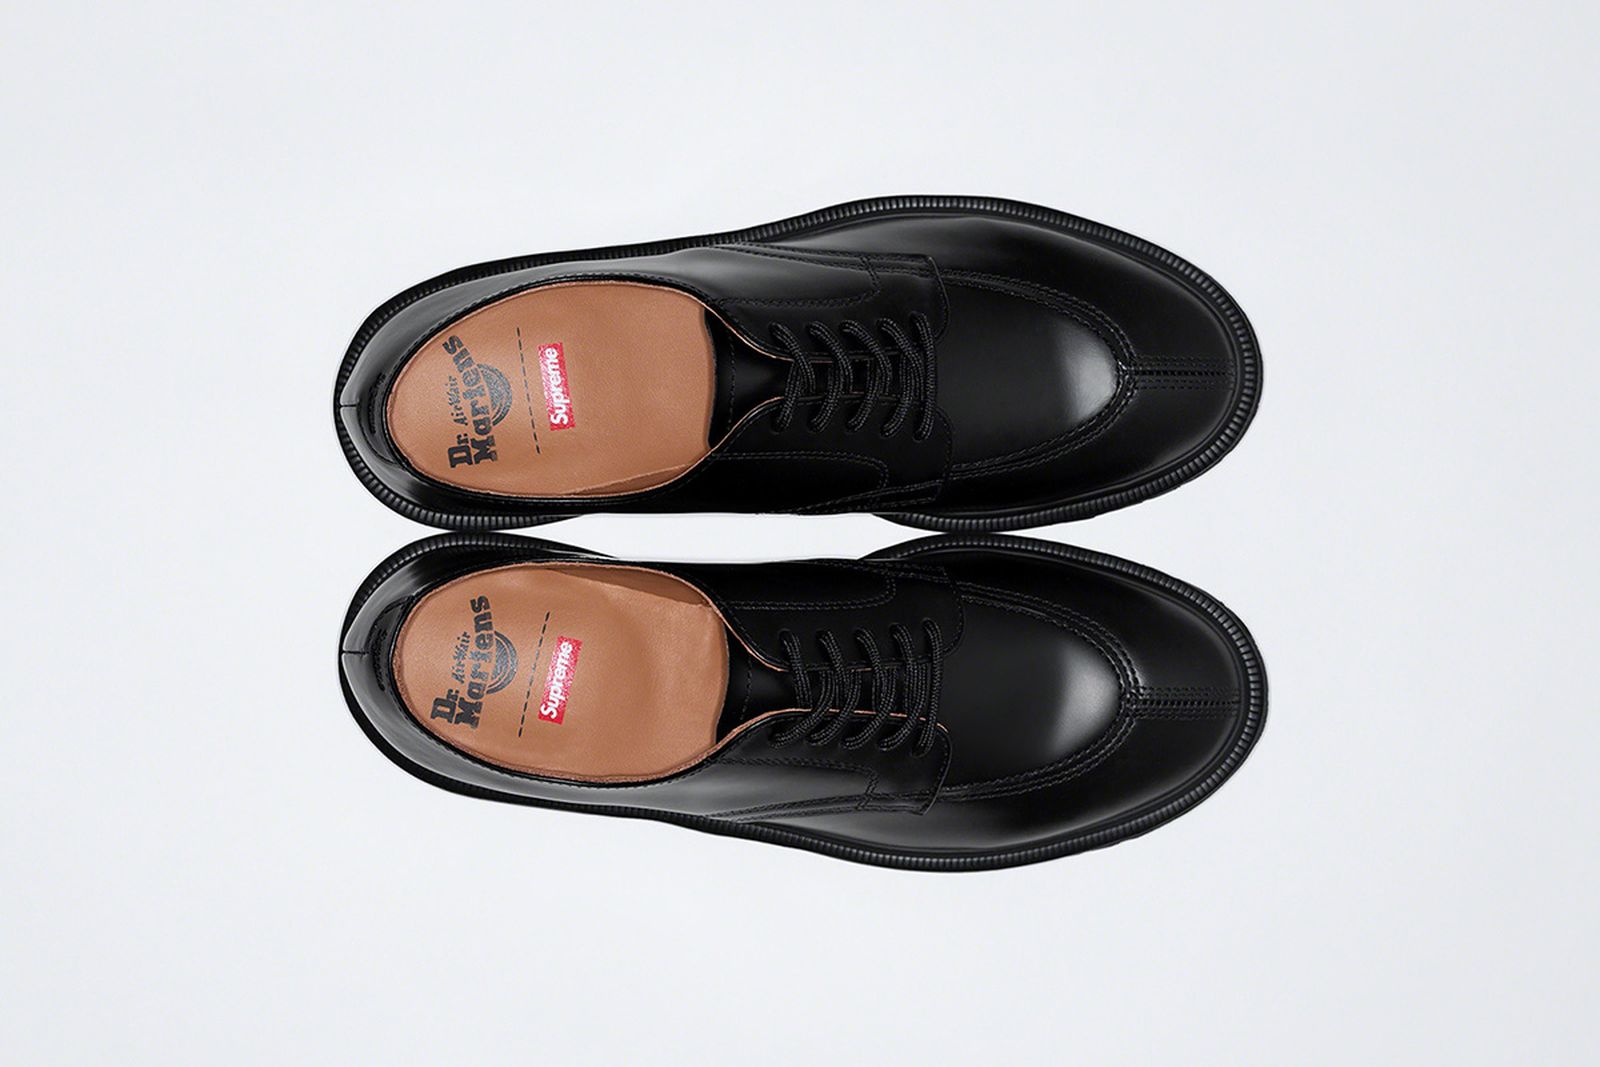 Supreme x Dr. Martens & Other Highlights From Today's Drop